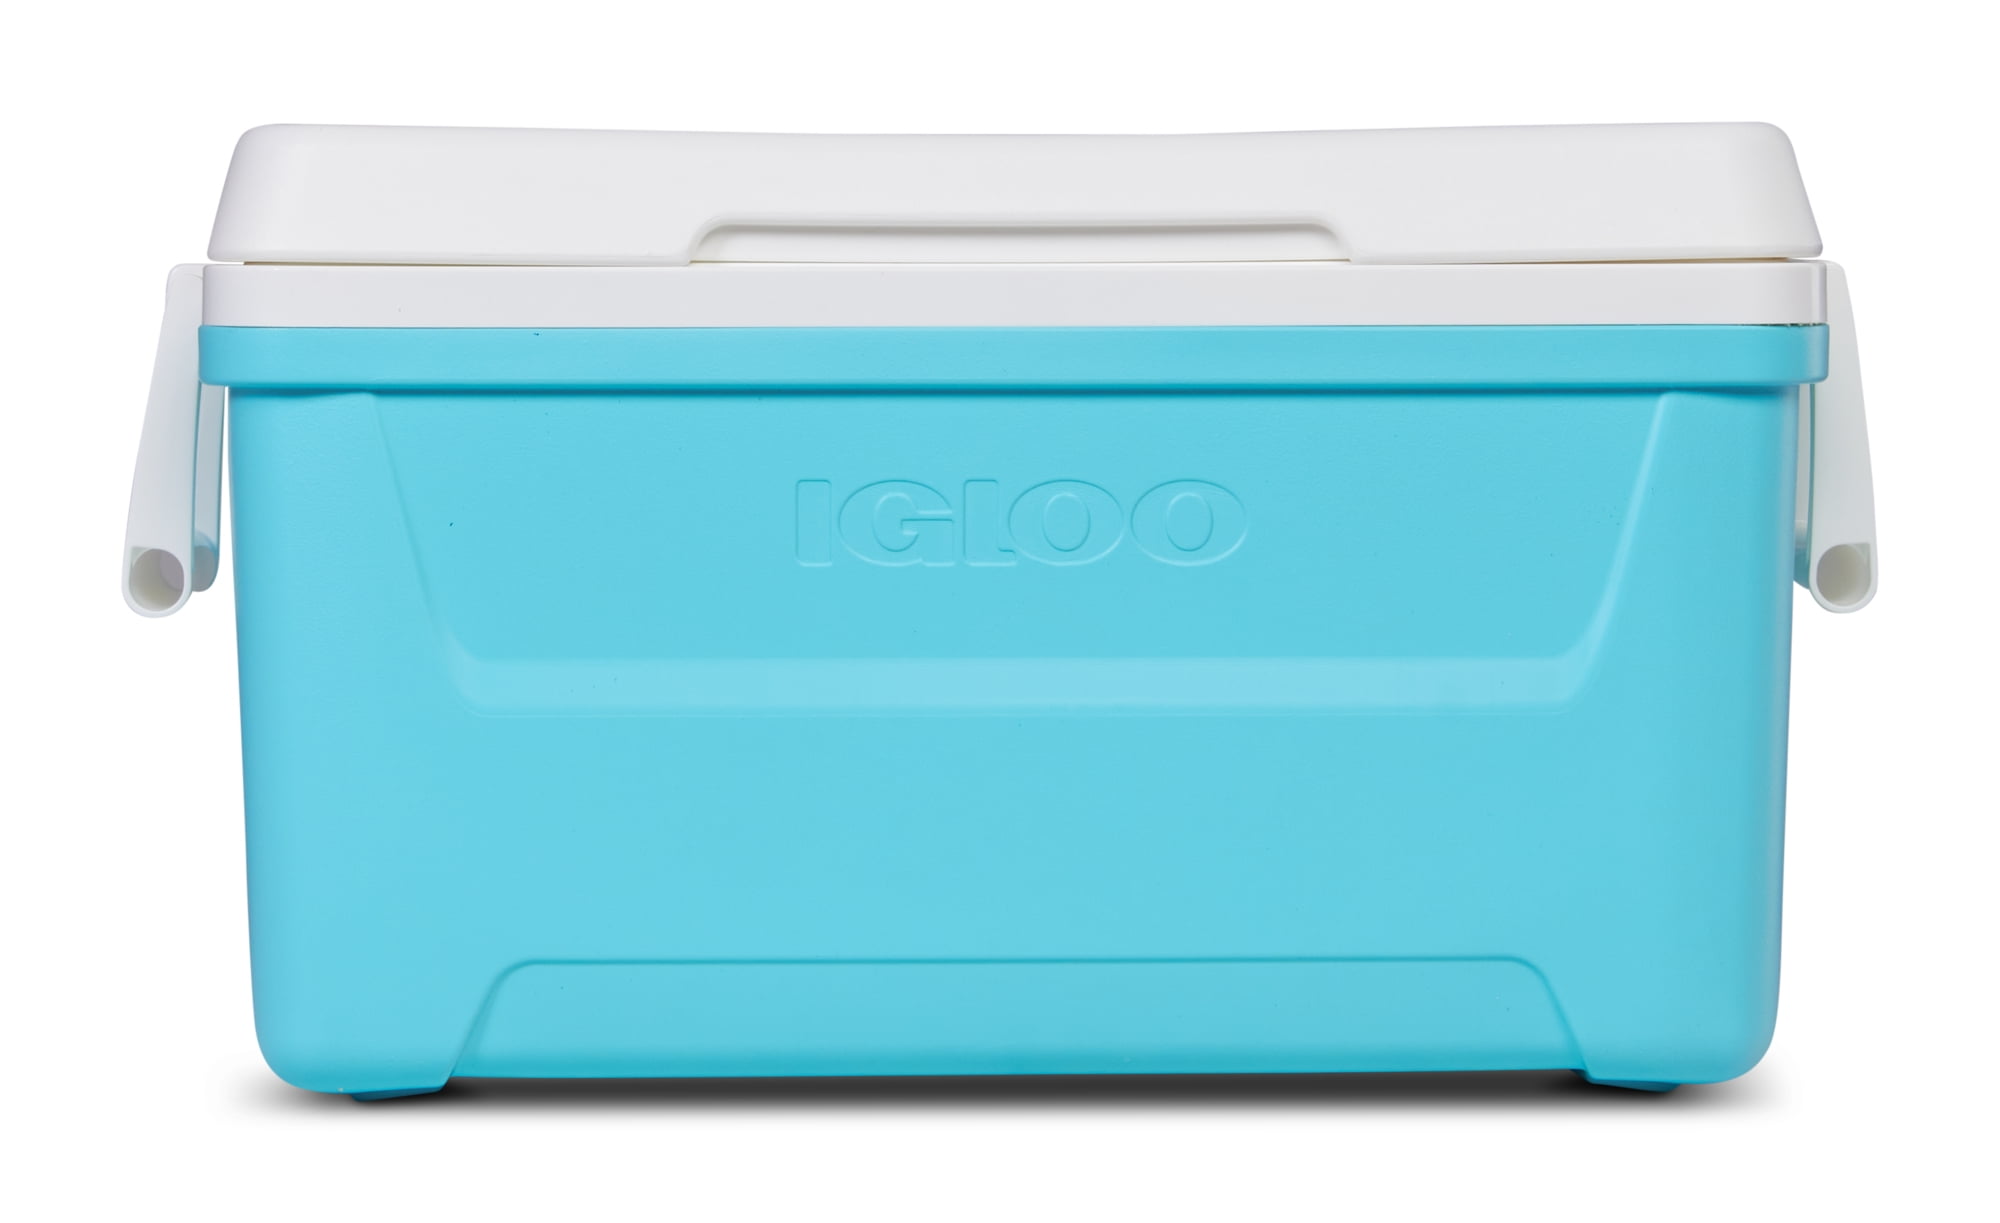 Details about   NEW 48 Quart Laguna Ice Chest Cooler With Swing Up Carry Handle Blue 45 Liters 